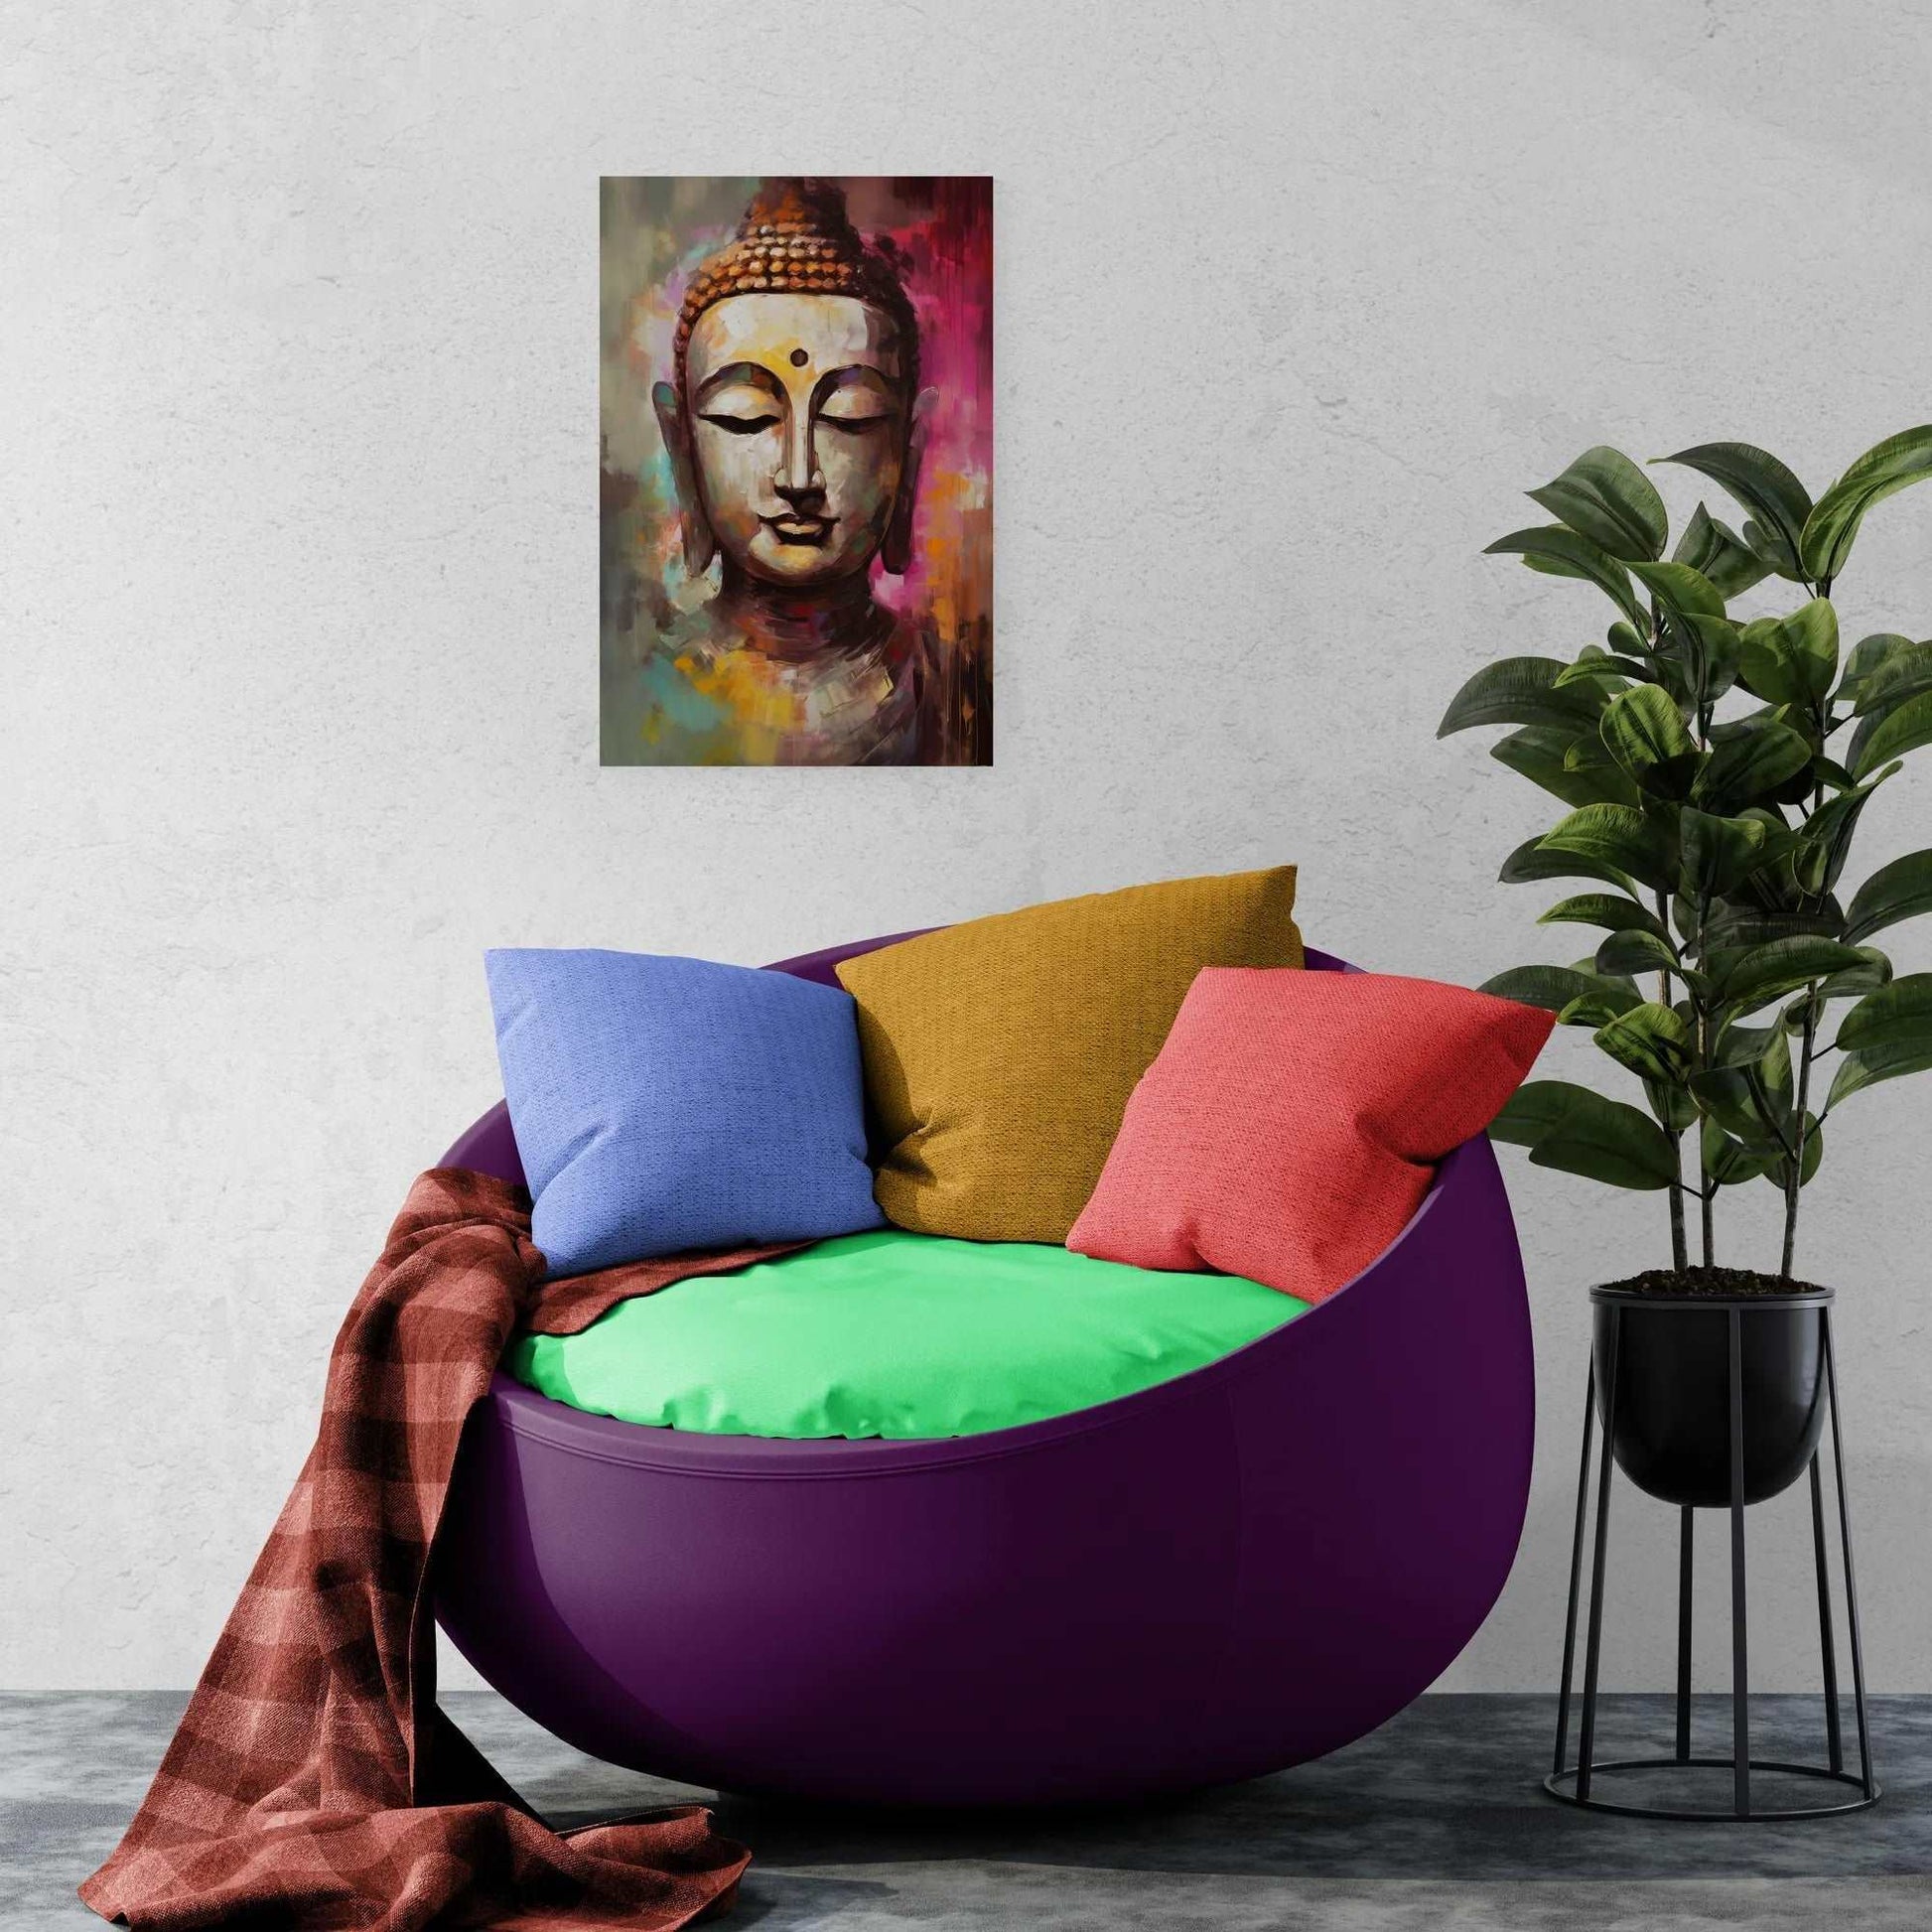 "Abstract Buddha portrait in vibrant colors above a modern purple chair with multicolored cushions and a brown throw.